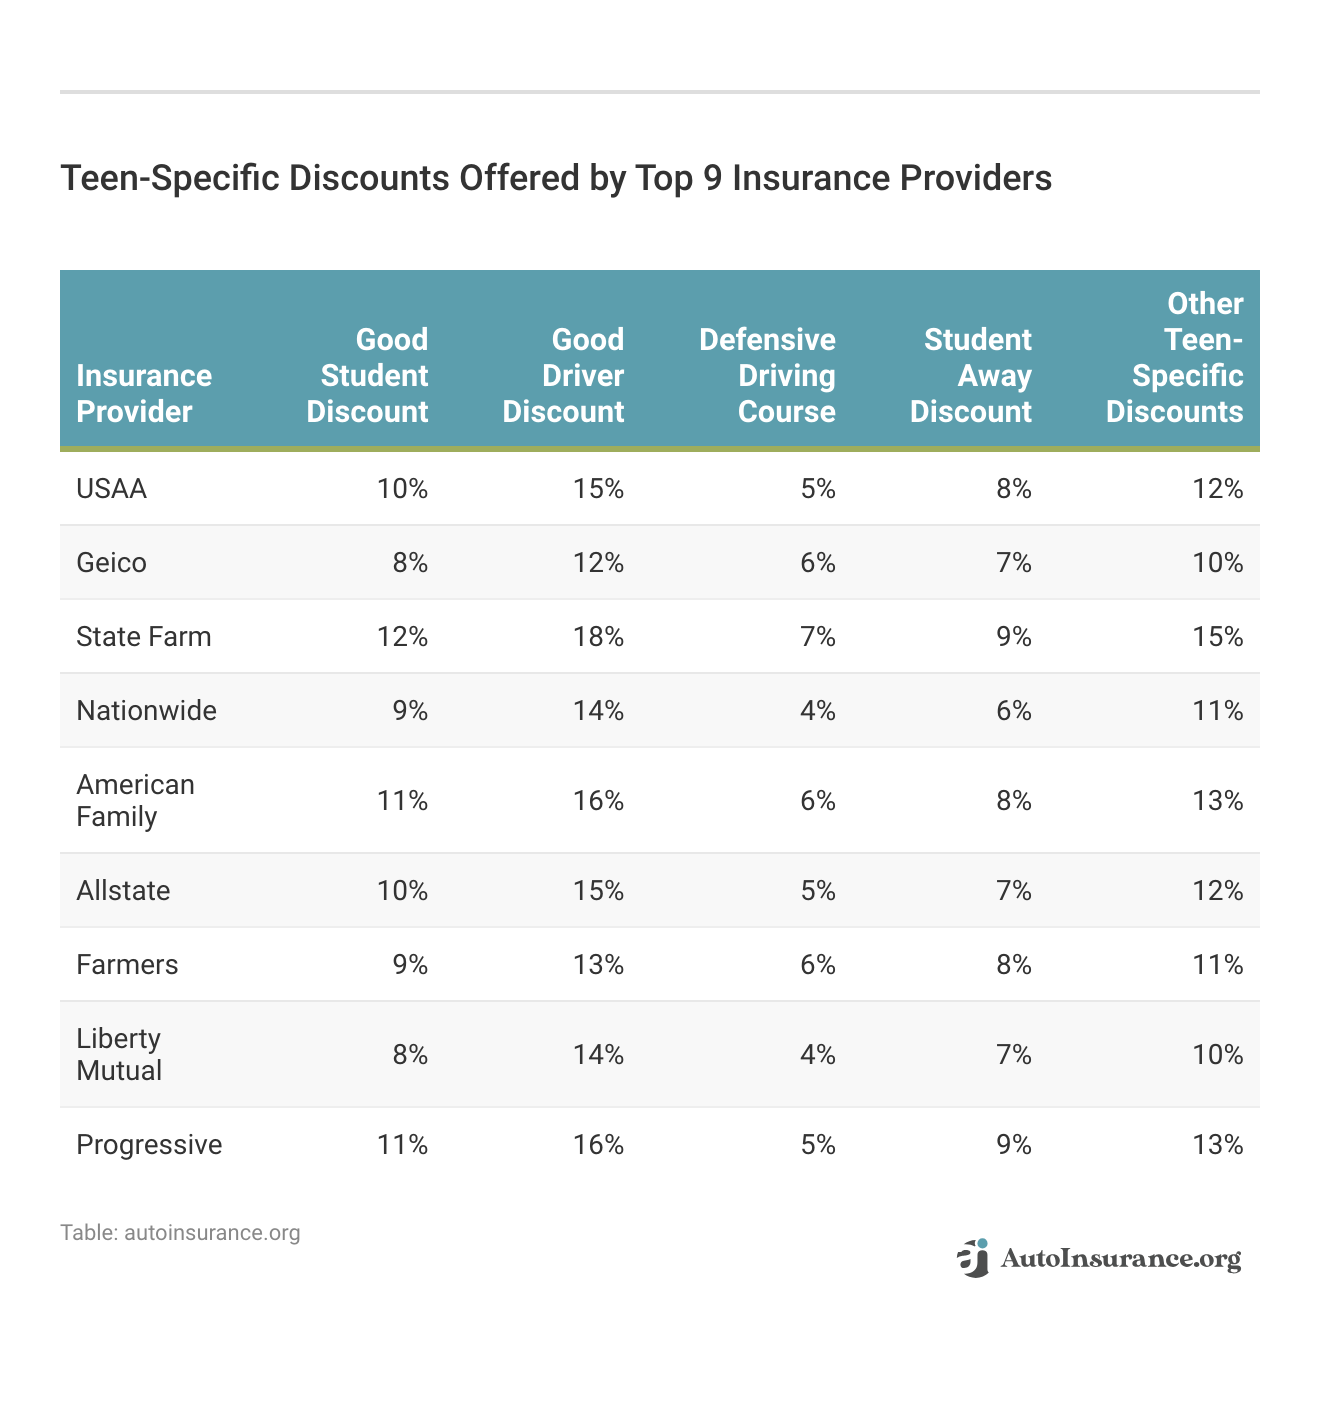 <h3>Teen-Specific Discounts Offered by Top 9 Insurance Providers</h3>